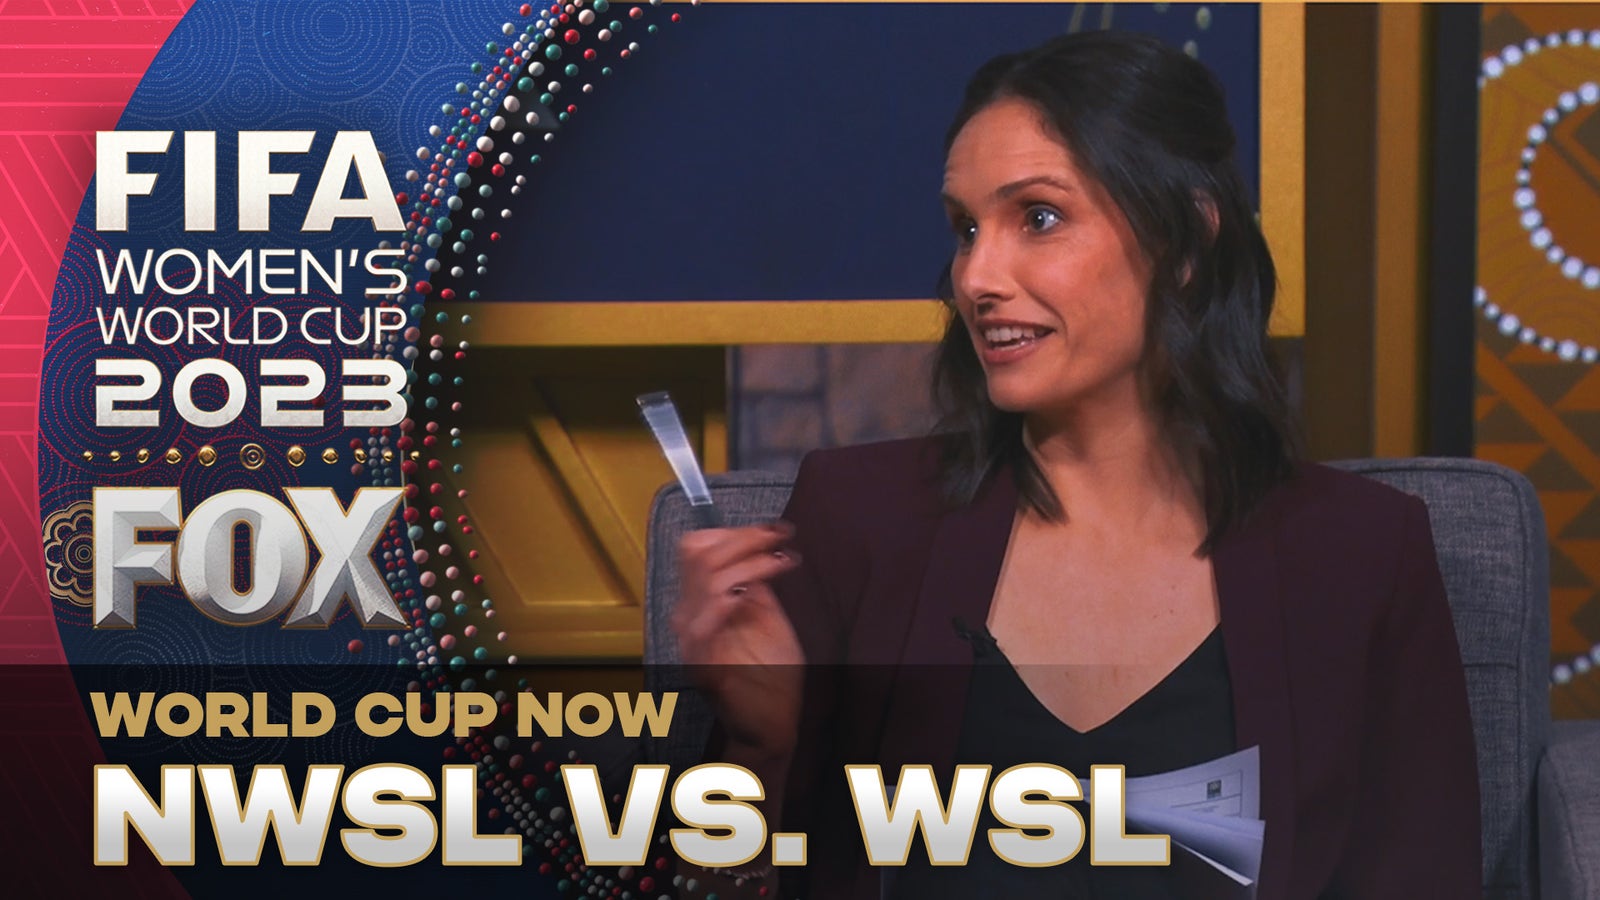 "World Cup NOW" crew discusses the differences of the NWSL and WSL